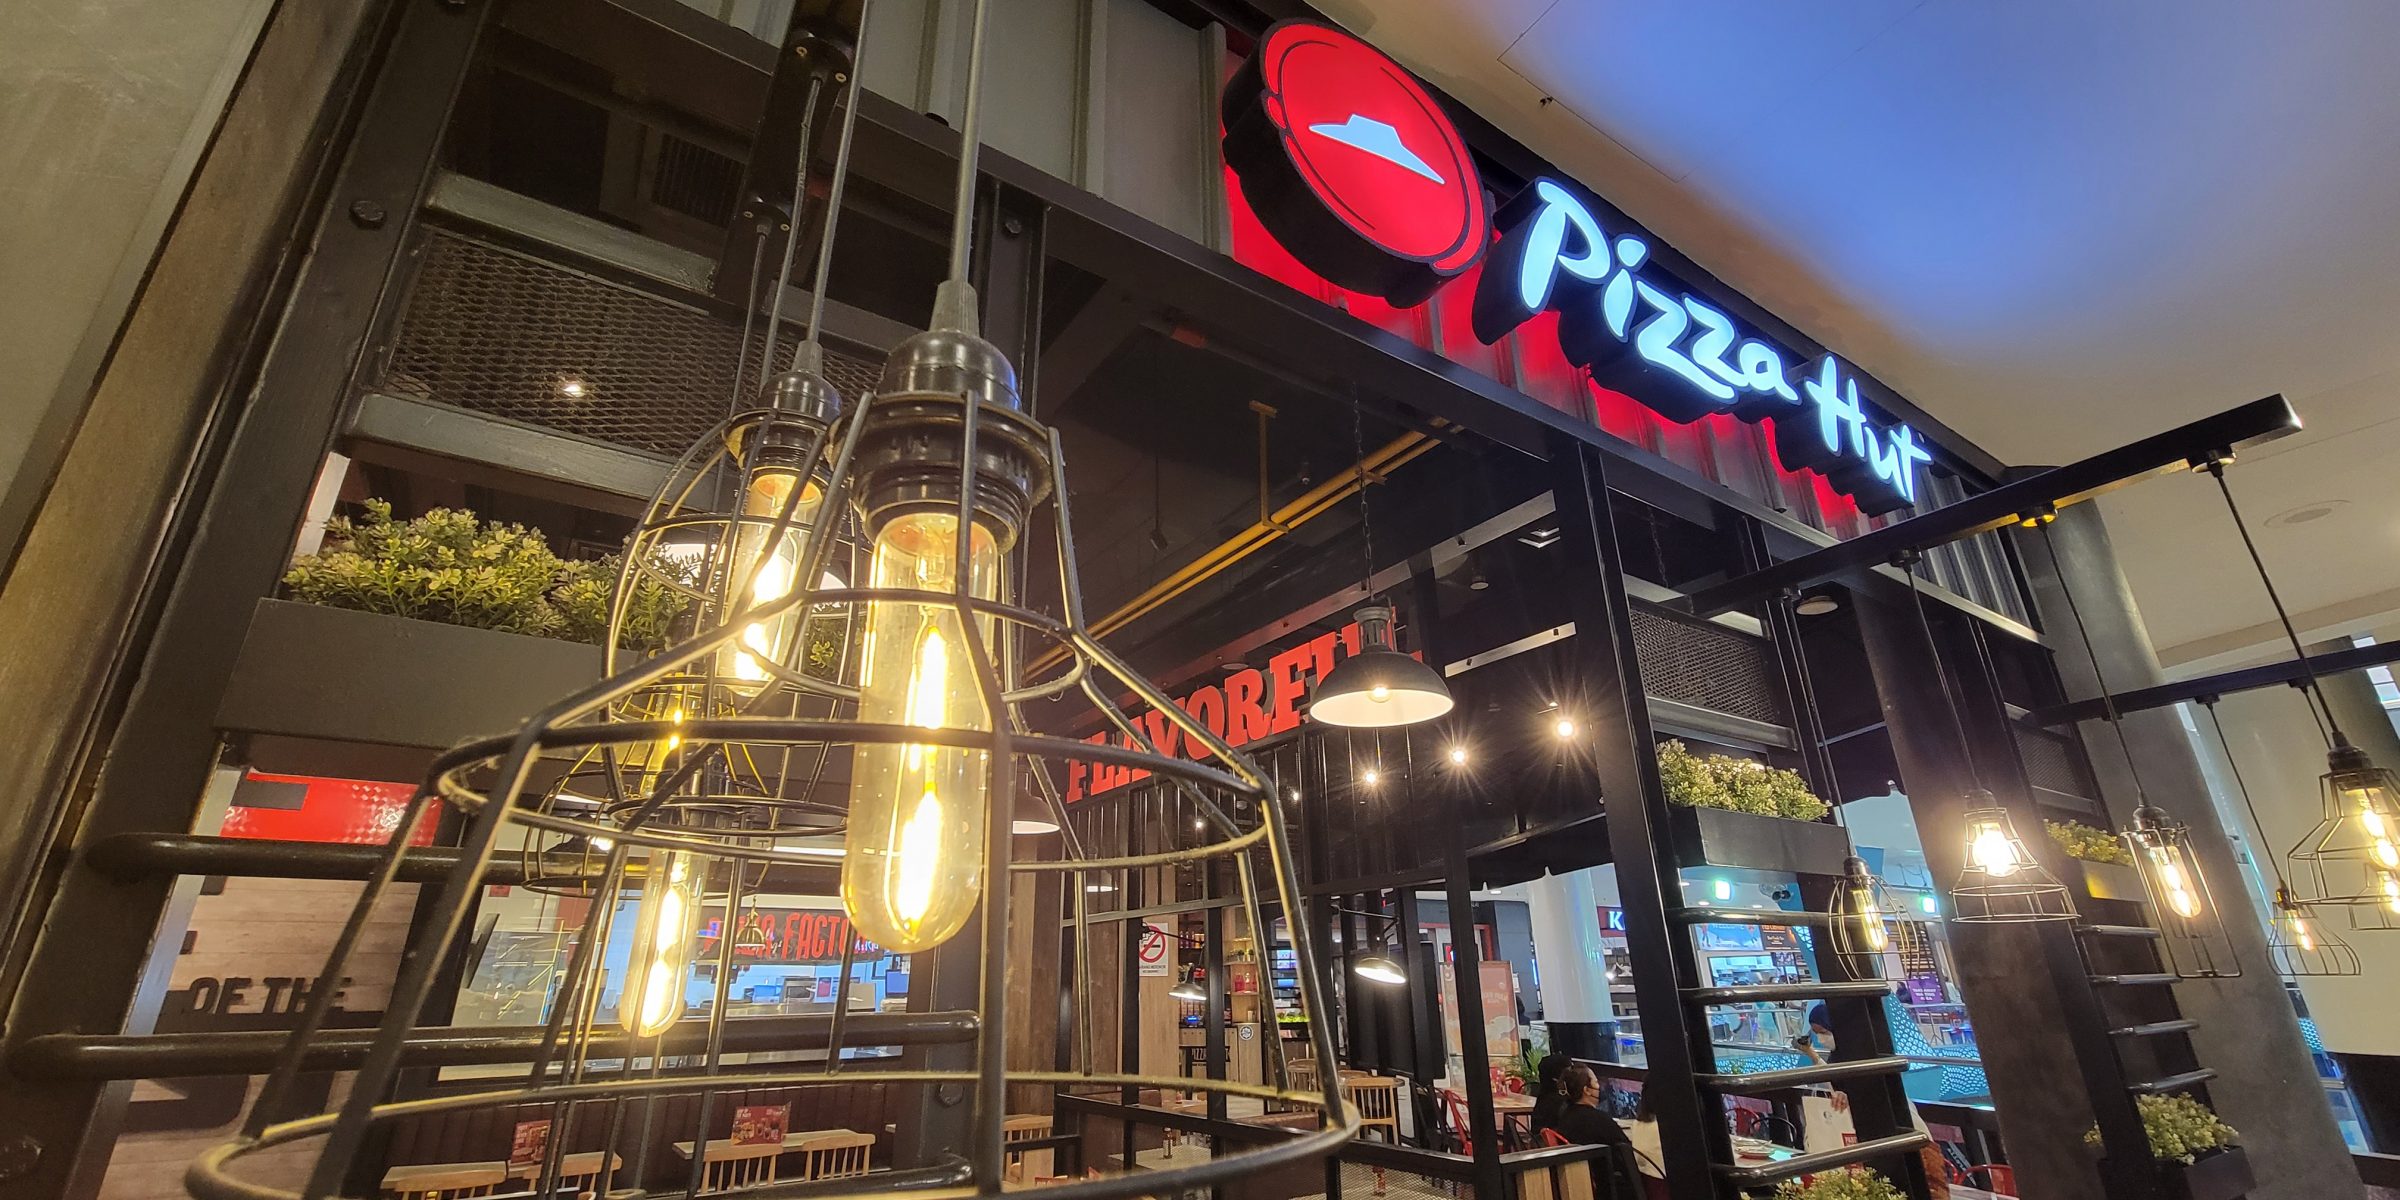 A Pizza Hut outlet in Malaysia